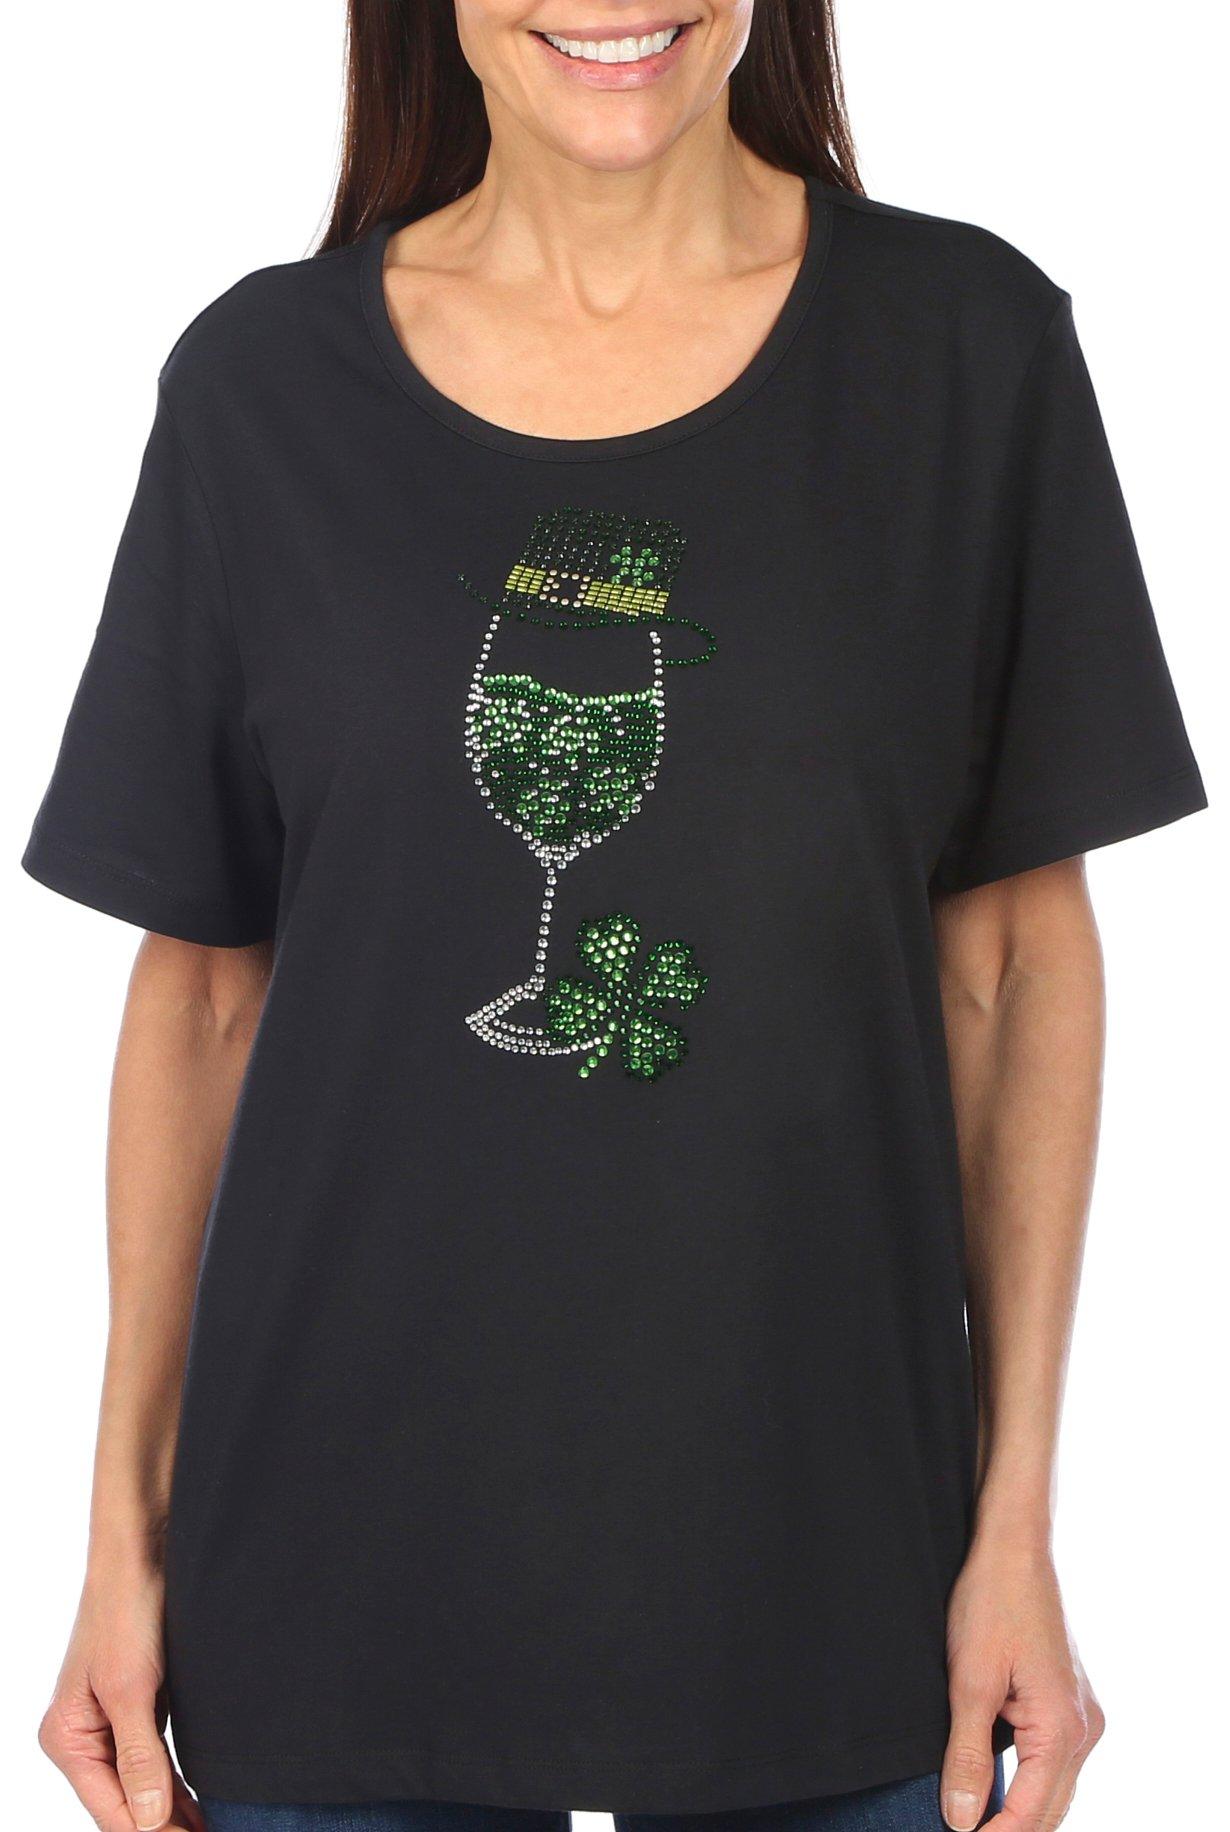 Coral Bay Womens St. Patricks Cocktail Short Sleeve Top